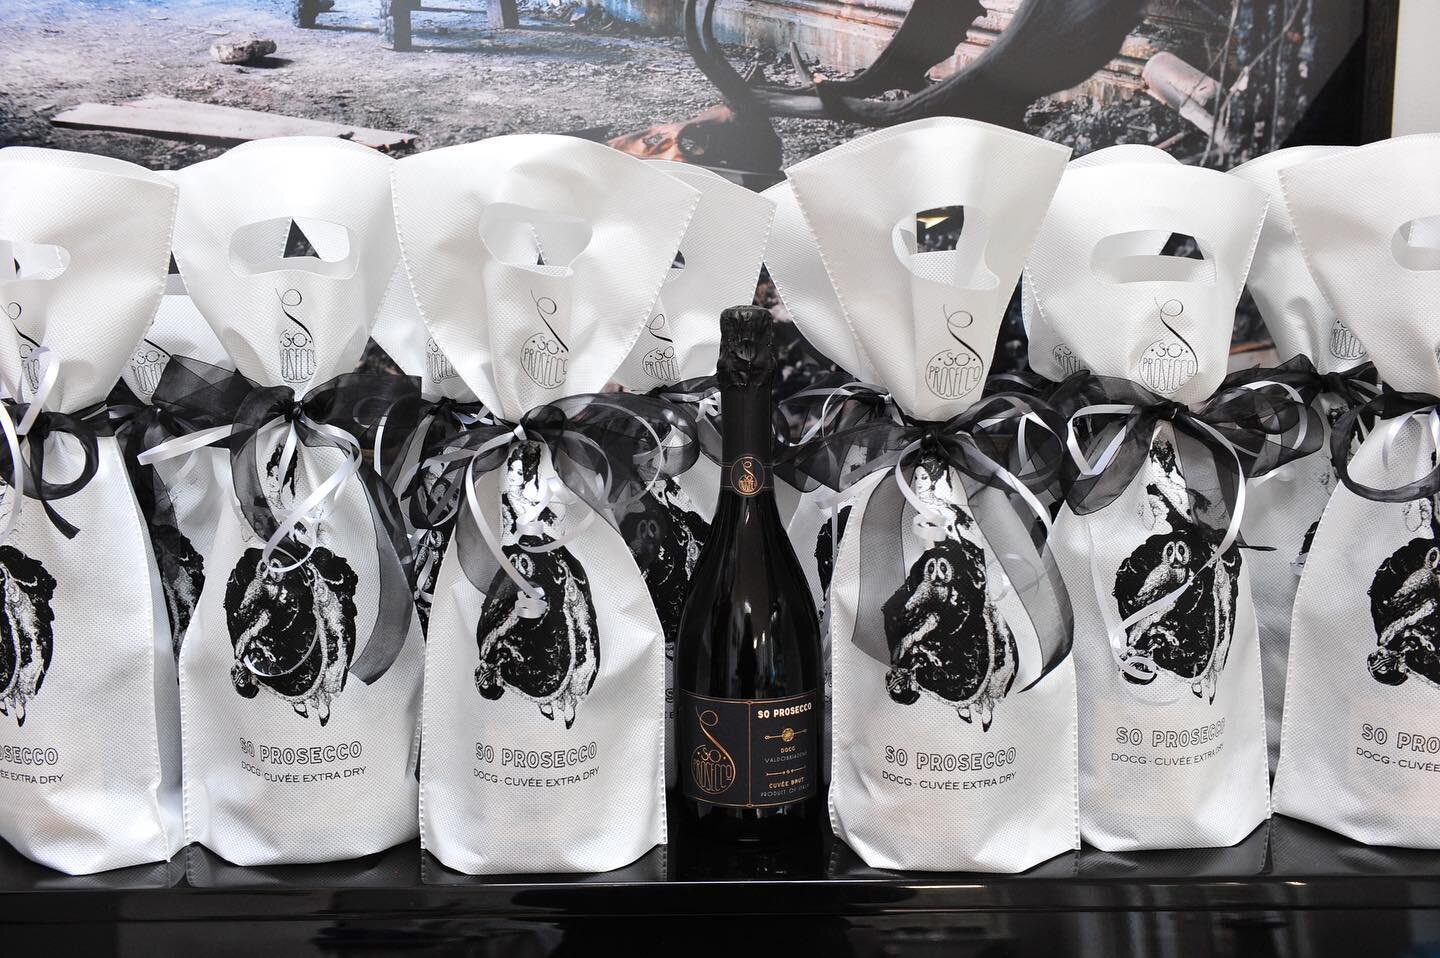 We love putting together a gift idea for you. Contact us directly 💫 🎁 📧 info@soprosecco.com if you are looking for great tasting Italian wine presents this year #soitalianwines #soprosecco #winegifts #hampers 🍷 🥂 🍾